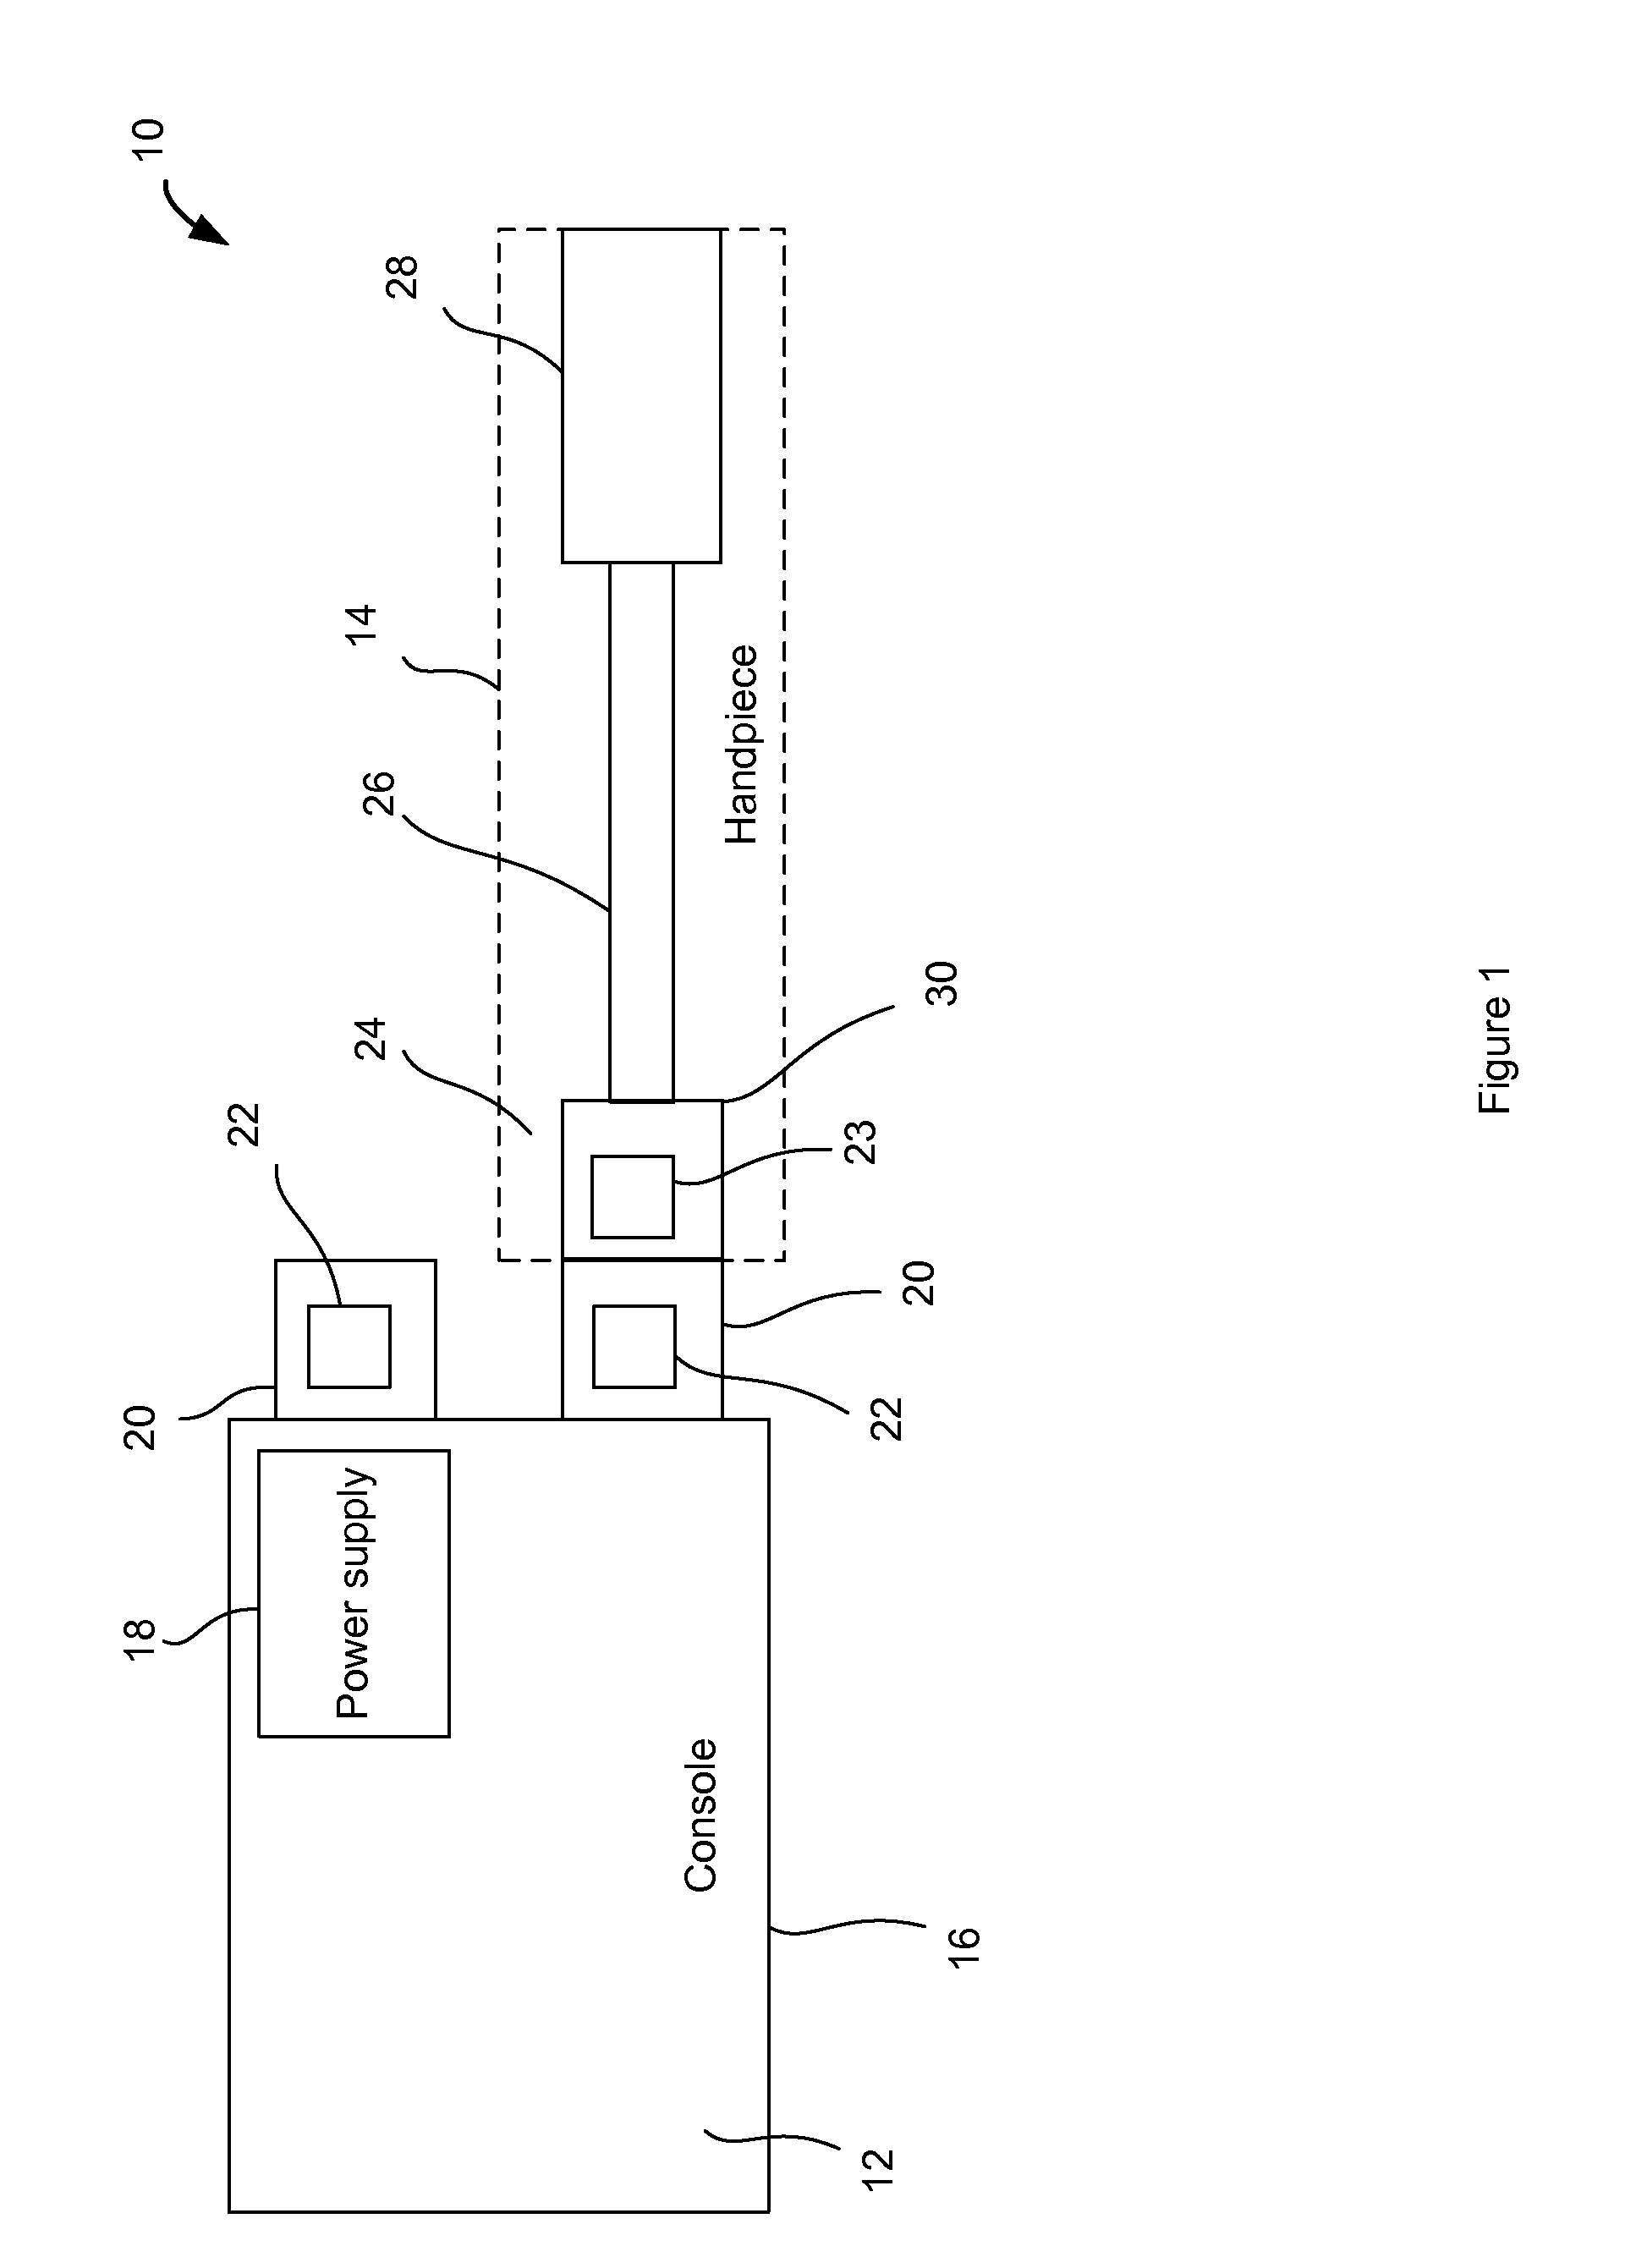 System and method for dental applications without optical connectors in console, and handpiece assembly therefor